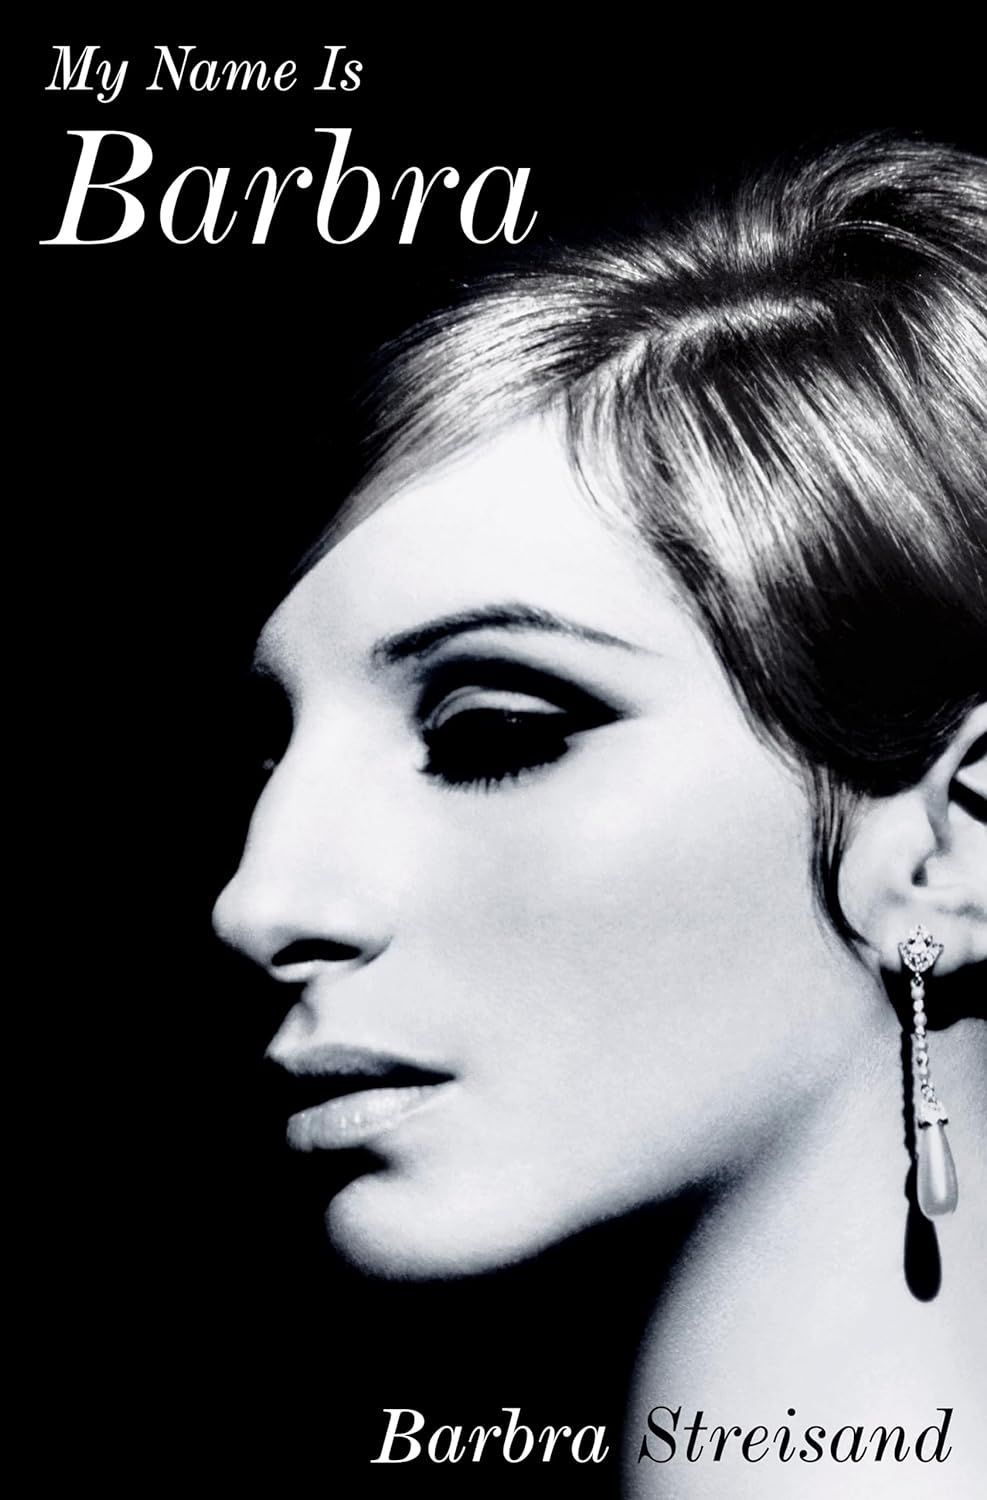 No More Hunger and Thirst? On Barbra Streisand’s “My Name Is Barbra”